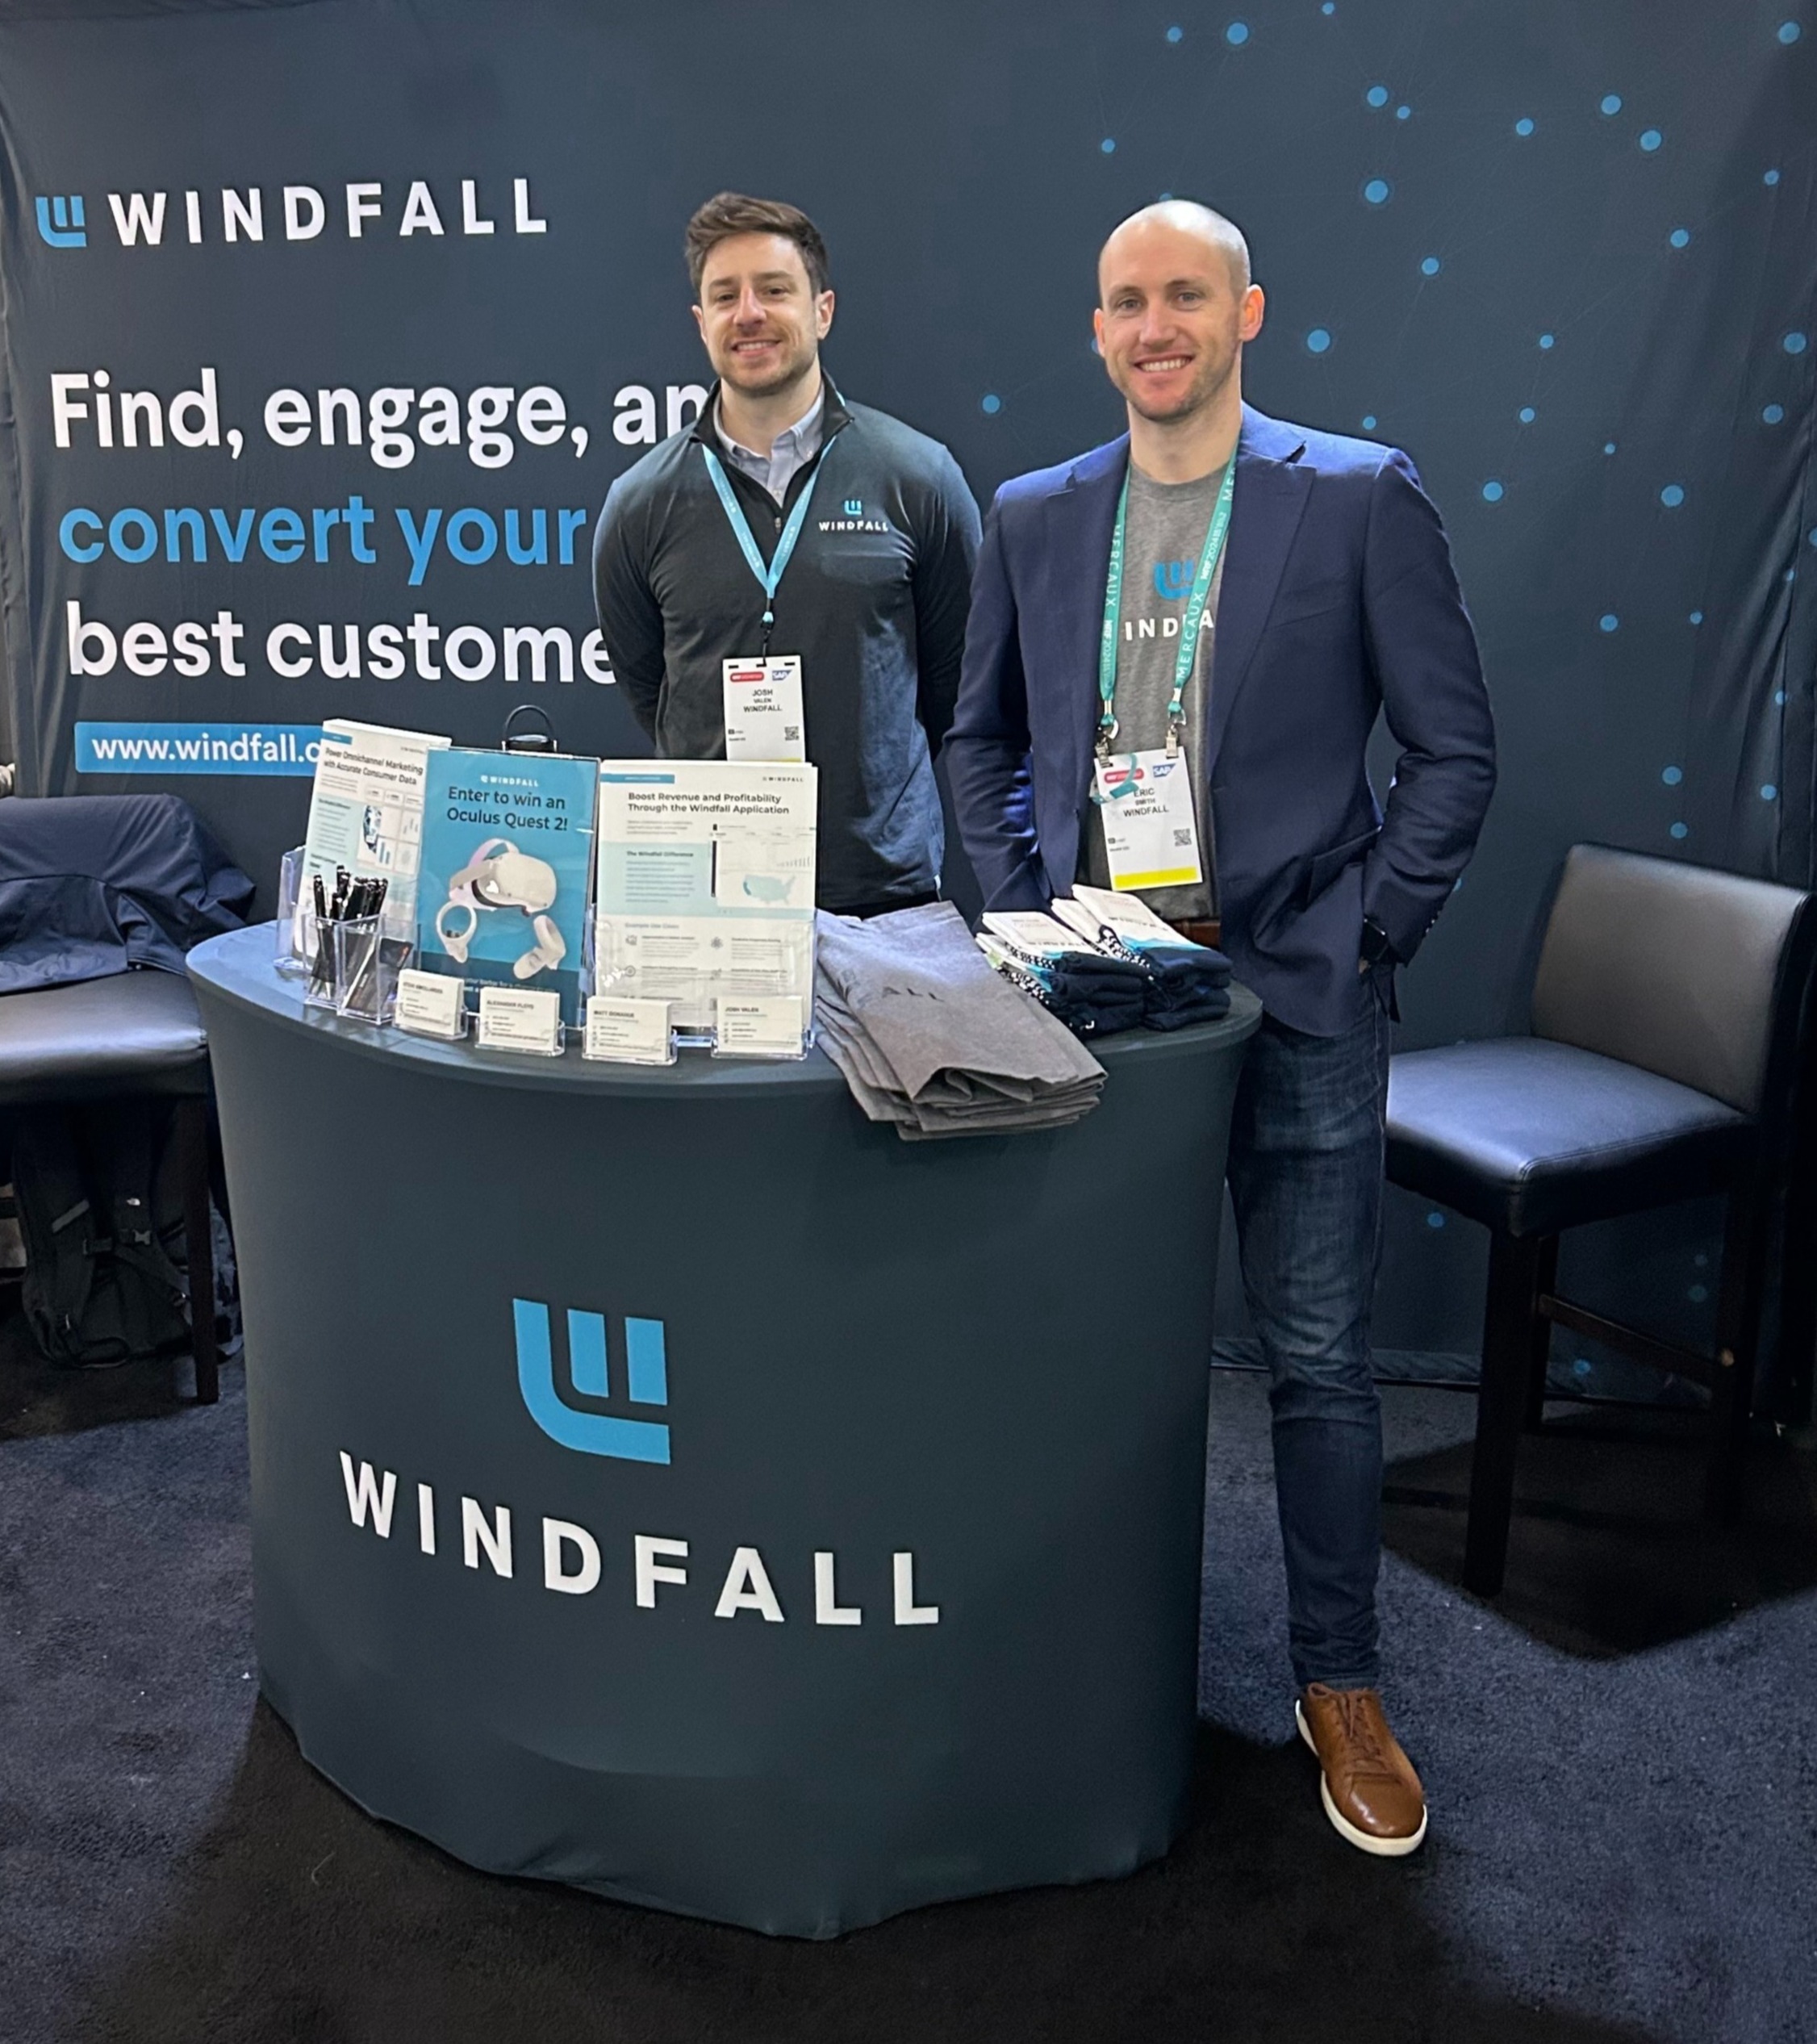 Windfall Employees at Event